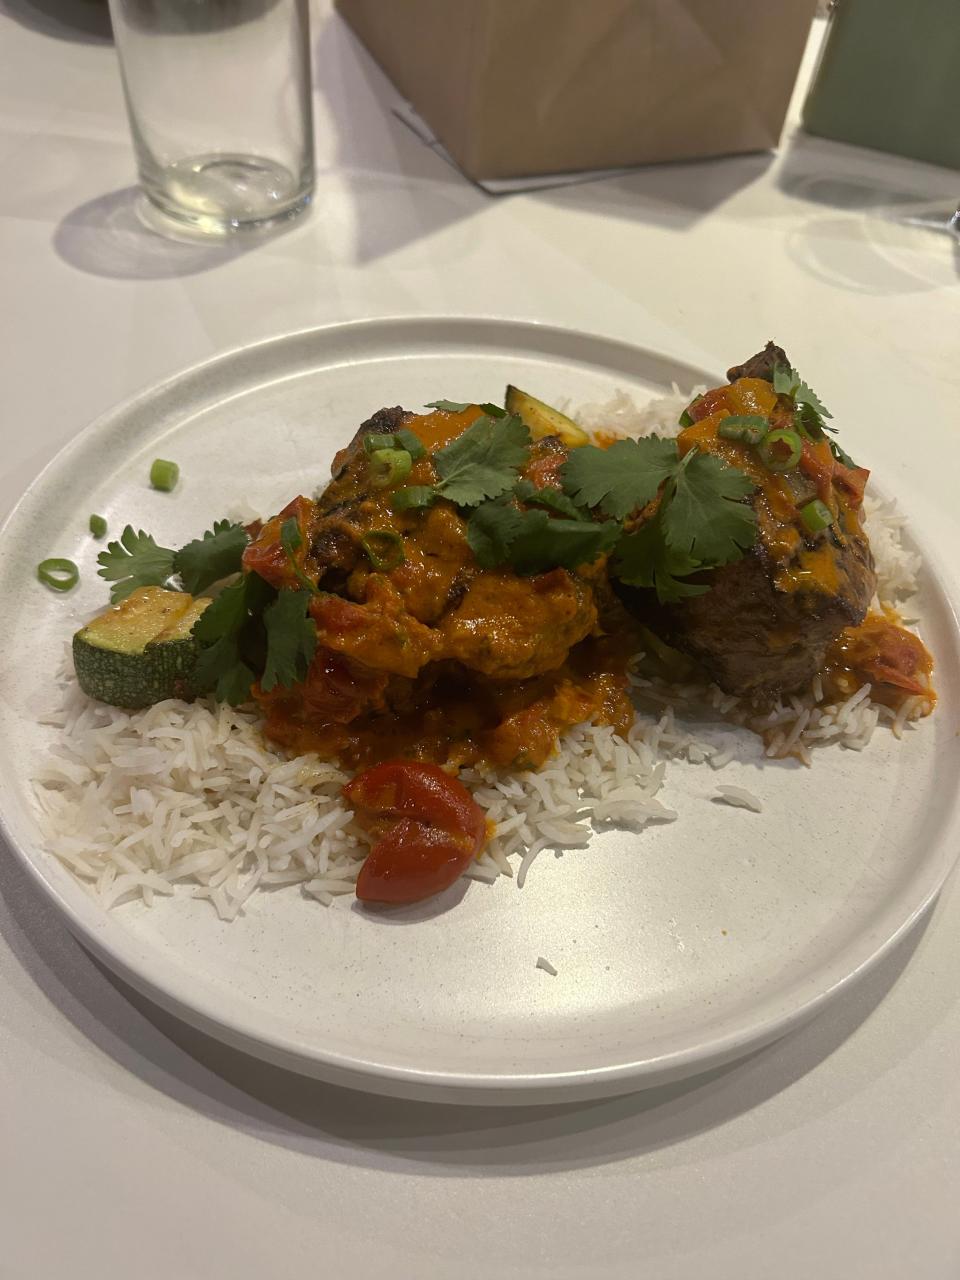 Lamb Tikka Masala dish at CAMP Modern American Eatery. An entree assisted in creation by Bhumi Chhabra of Masala Matters, a local Indian spices dealer.